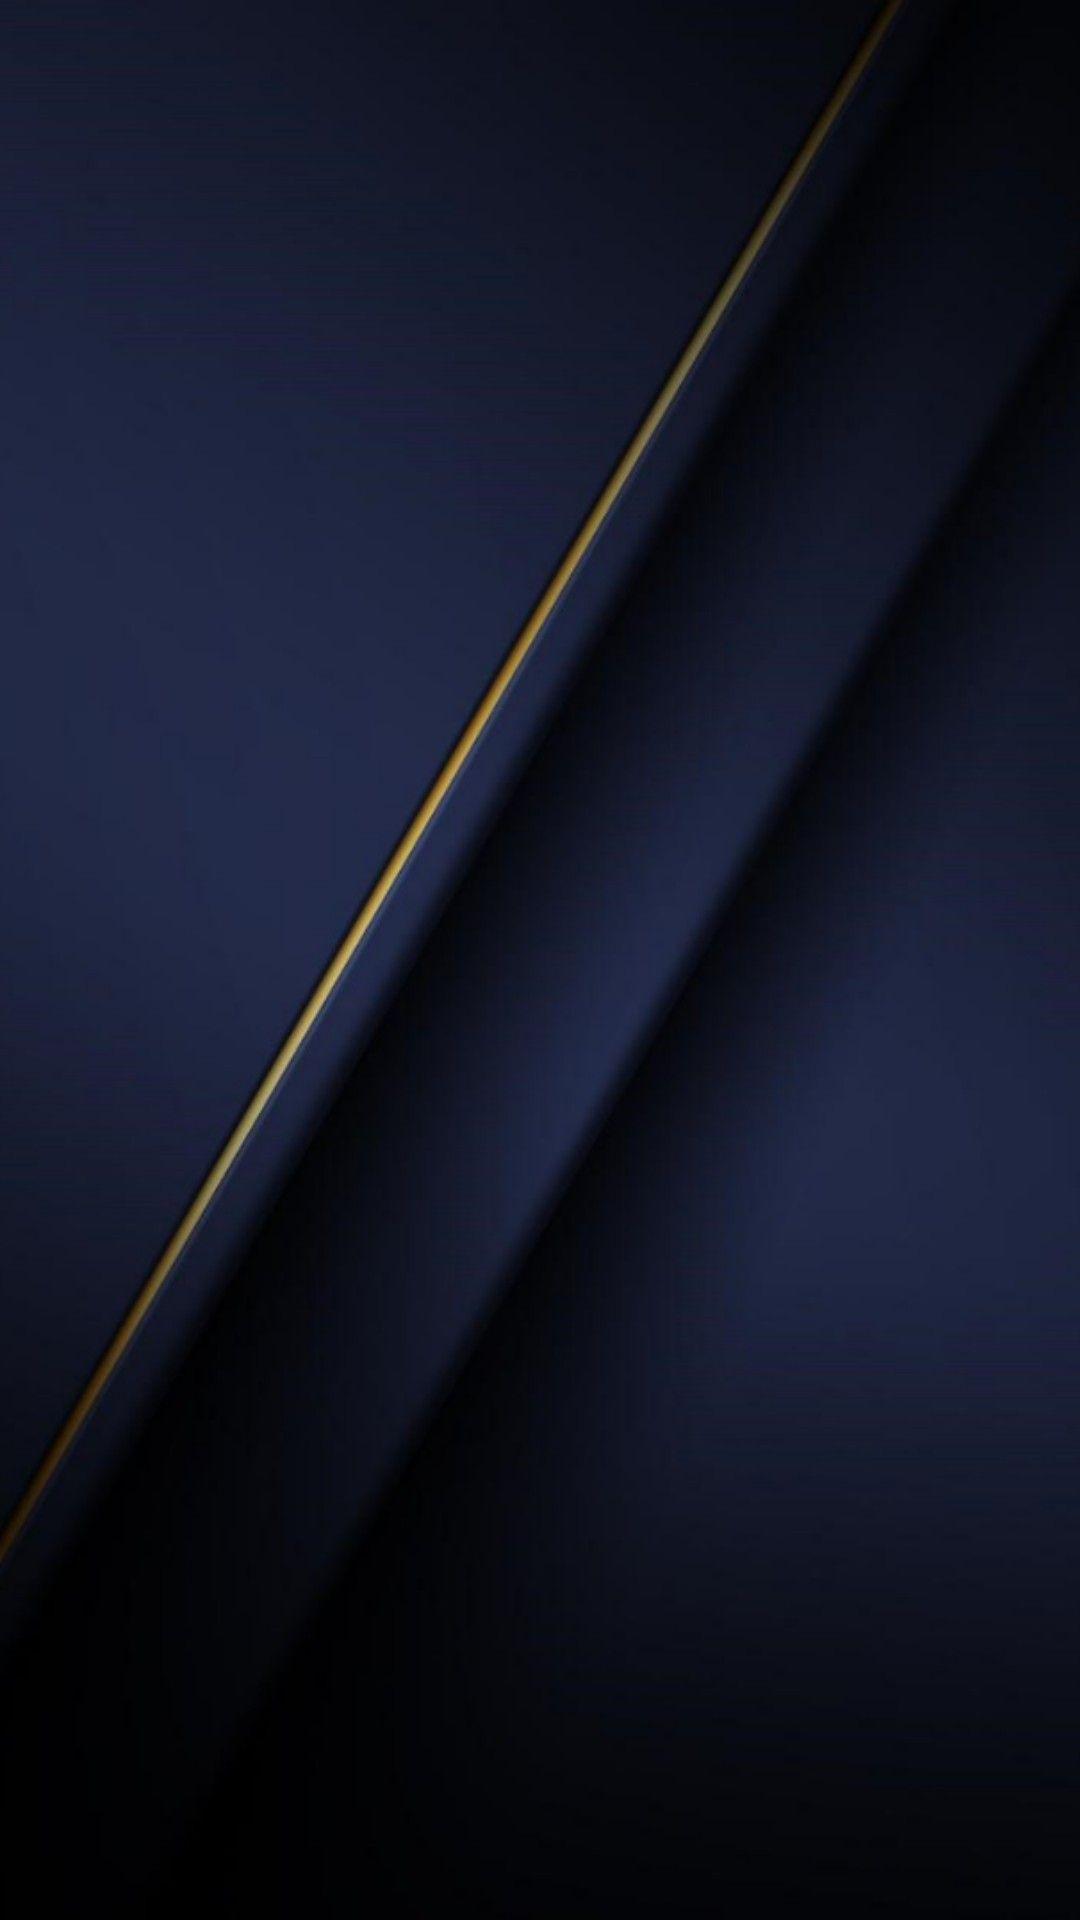 Black and Gold Phone Wallpapers - Top Free Black and Gold Phone